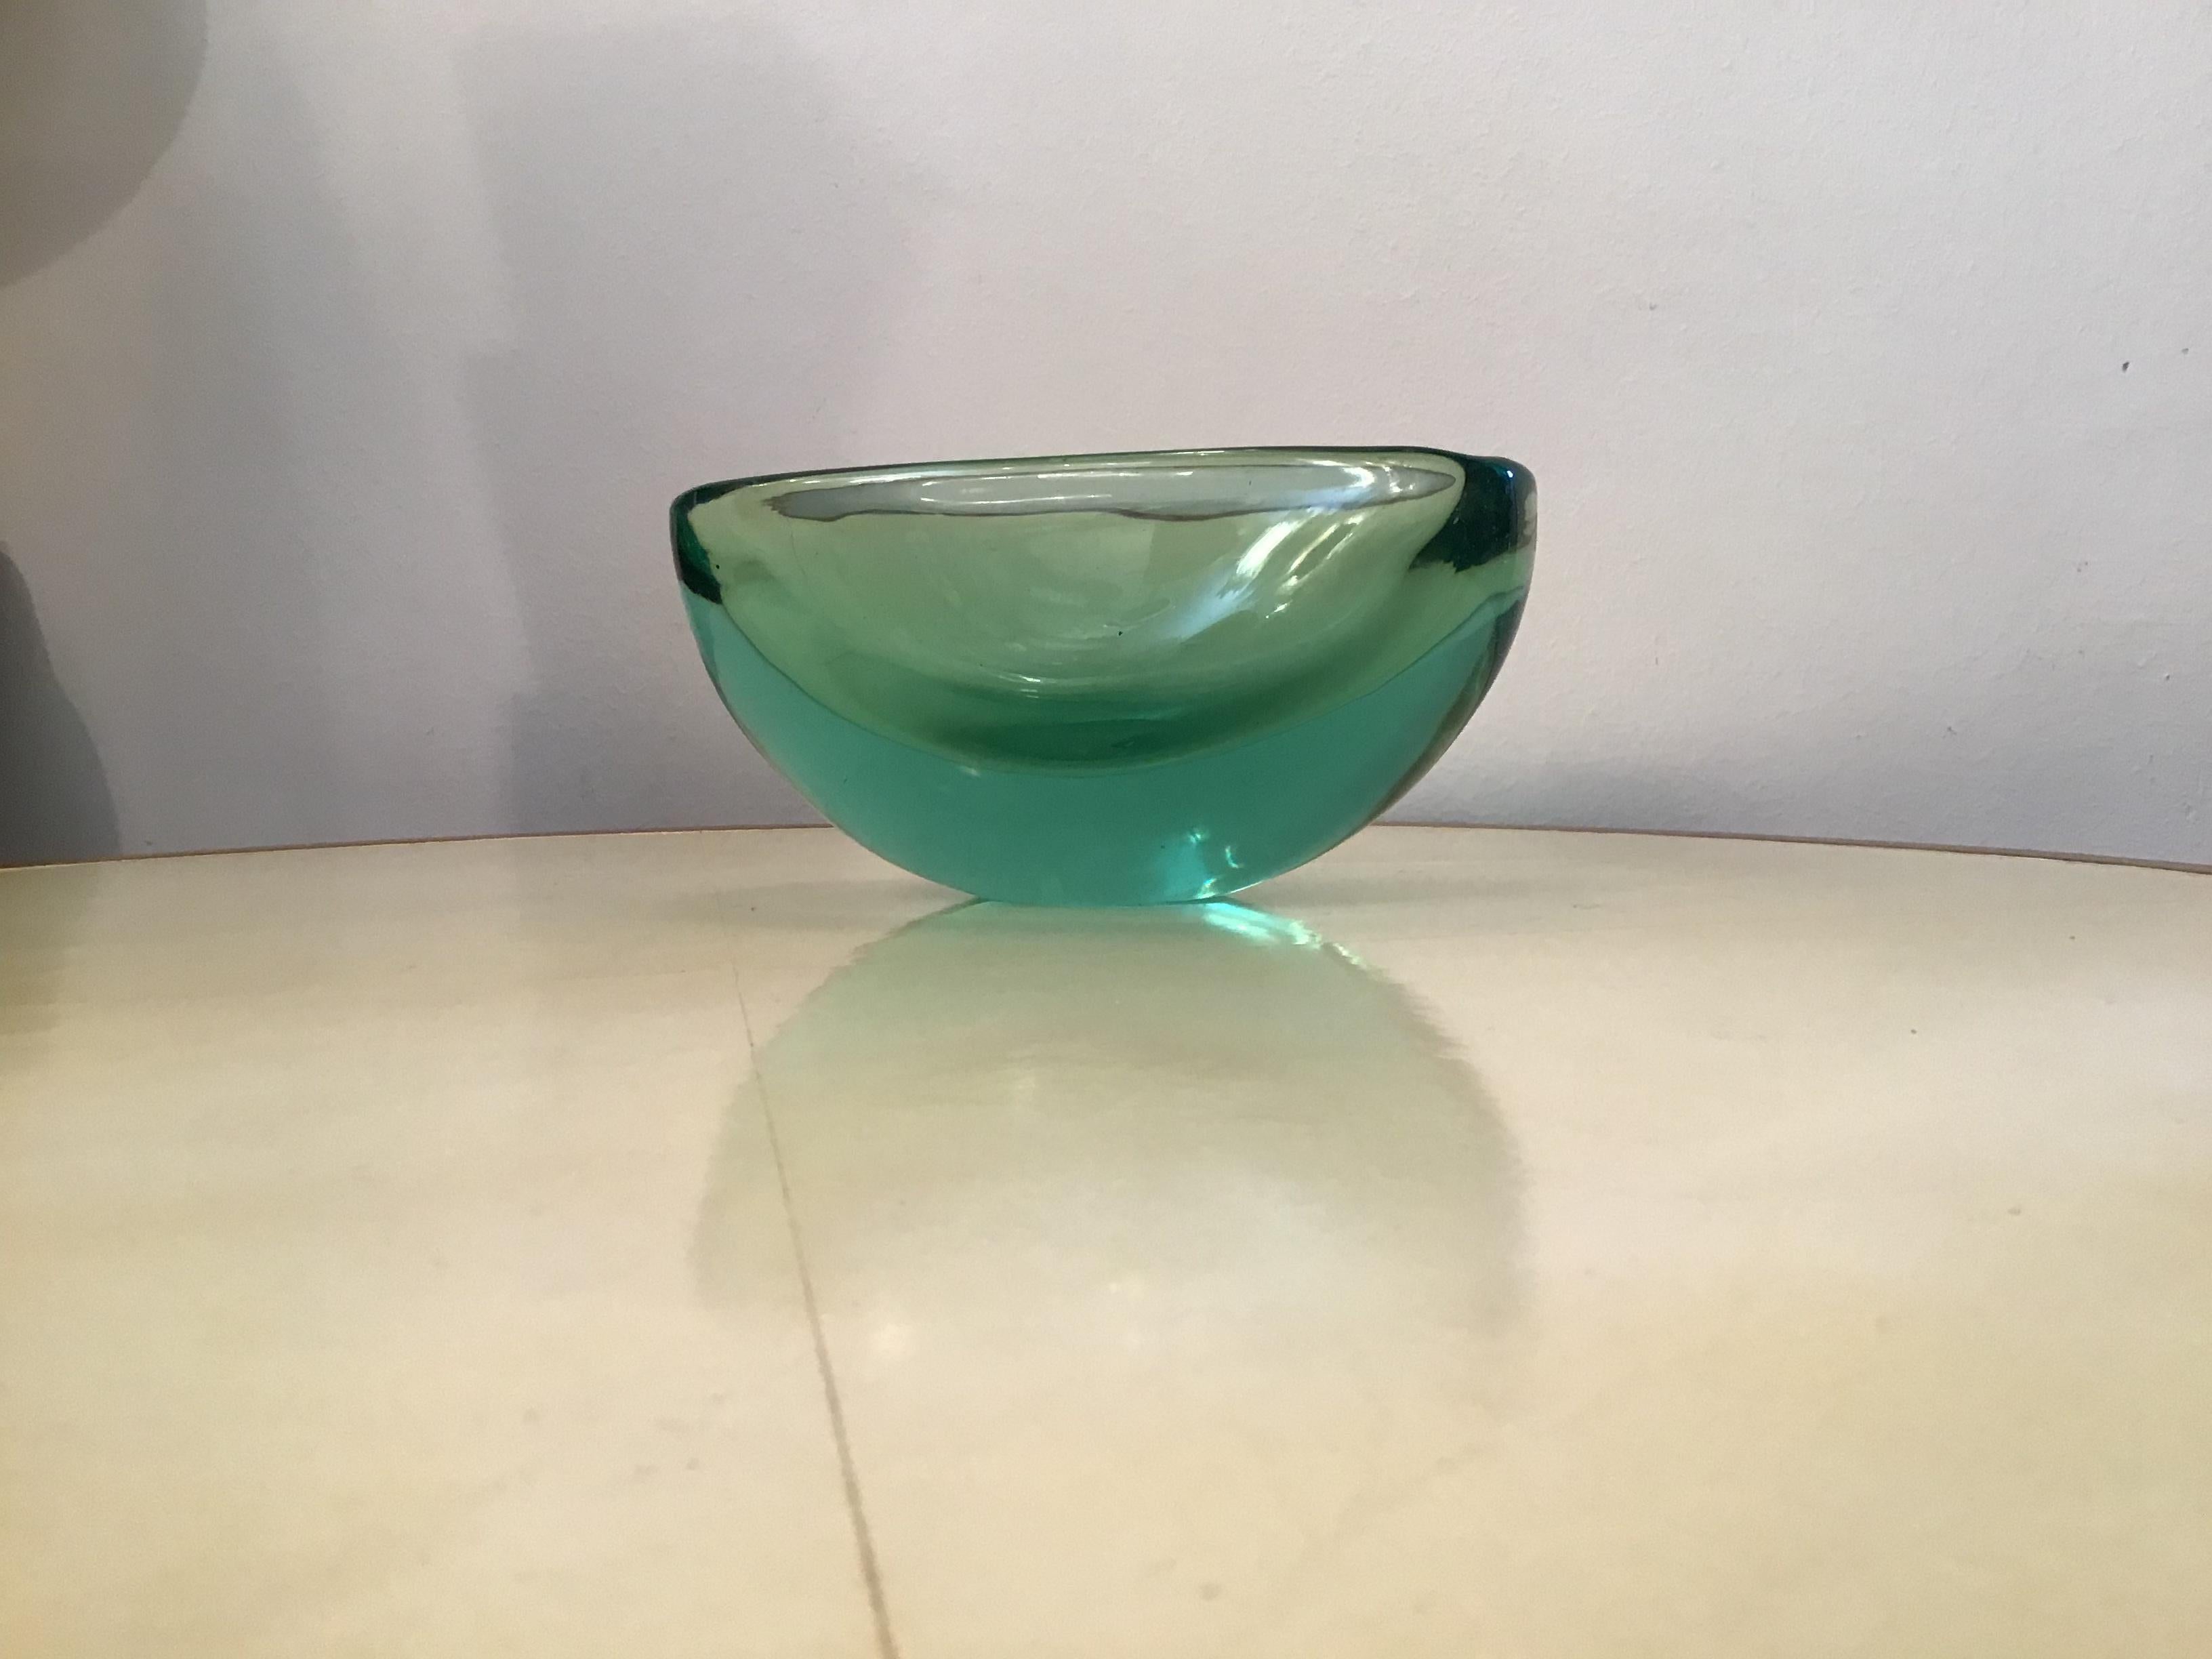 Archimede Seguso oval bowl green submerged glass centrepiece, 1950.